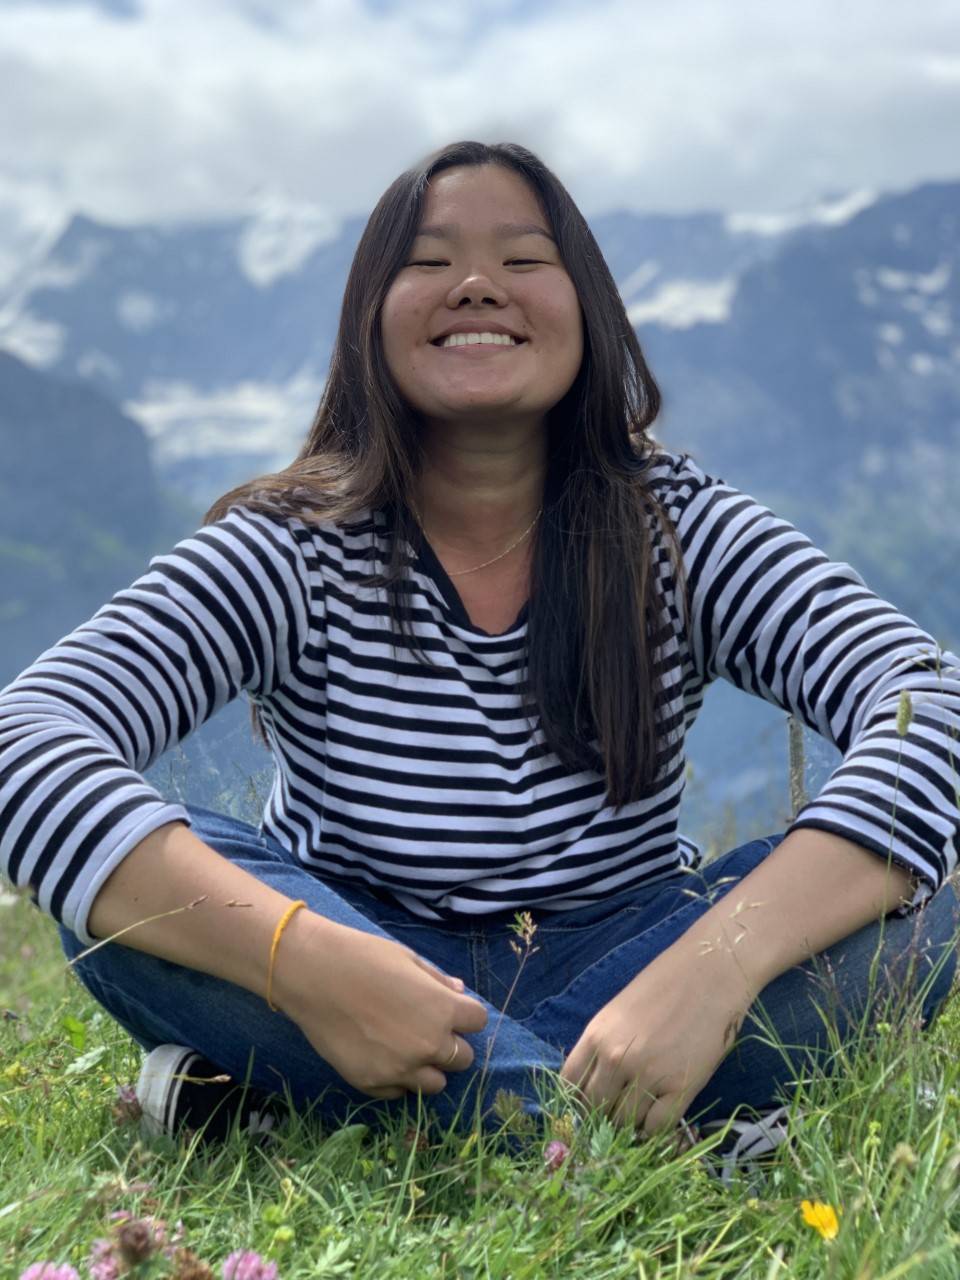 young woman sitting cross-legged in grass, smiling, with mountains and sky in background